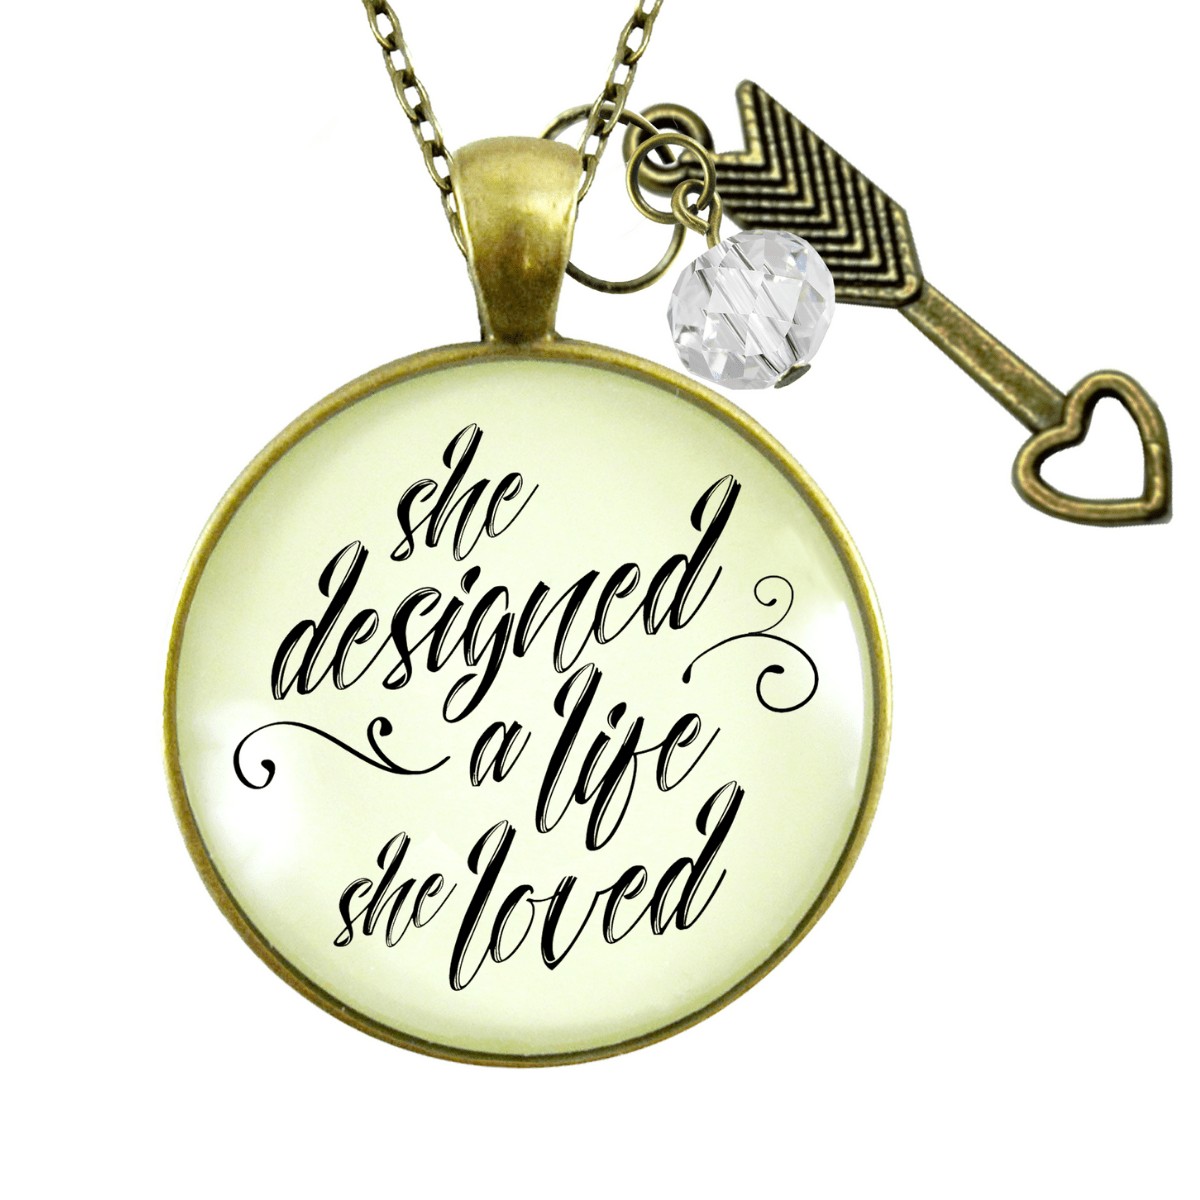 Gutsy Goodness She Designed Life Loved Necklace Purpose Inspired Brave Quote Jewelry - Gutsy Goodness Handmade Jewelry;She Designed Life Loved Necklace Purpose Inspired Brave Quote Jewelry - Gutsy Goodness Handmade Jewelry Gifts